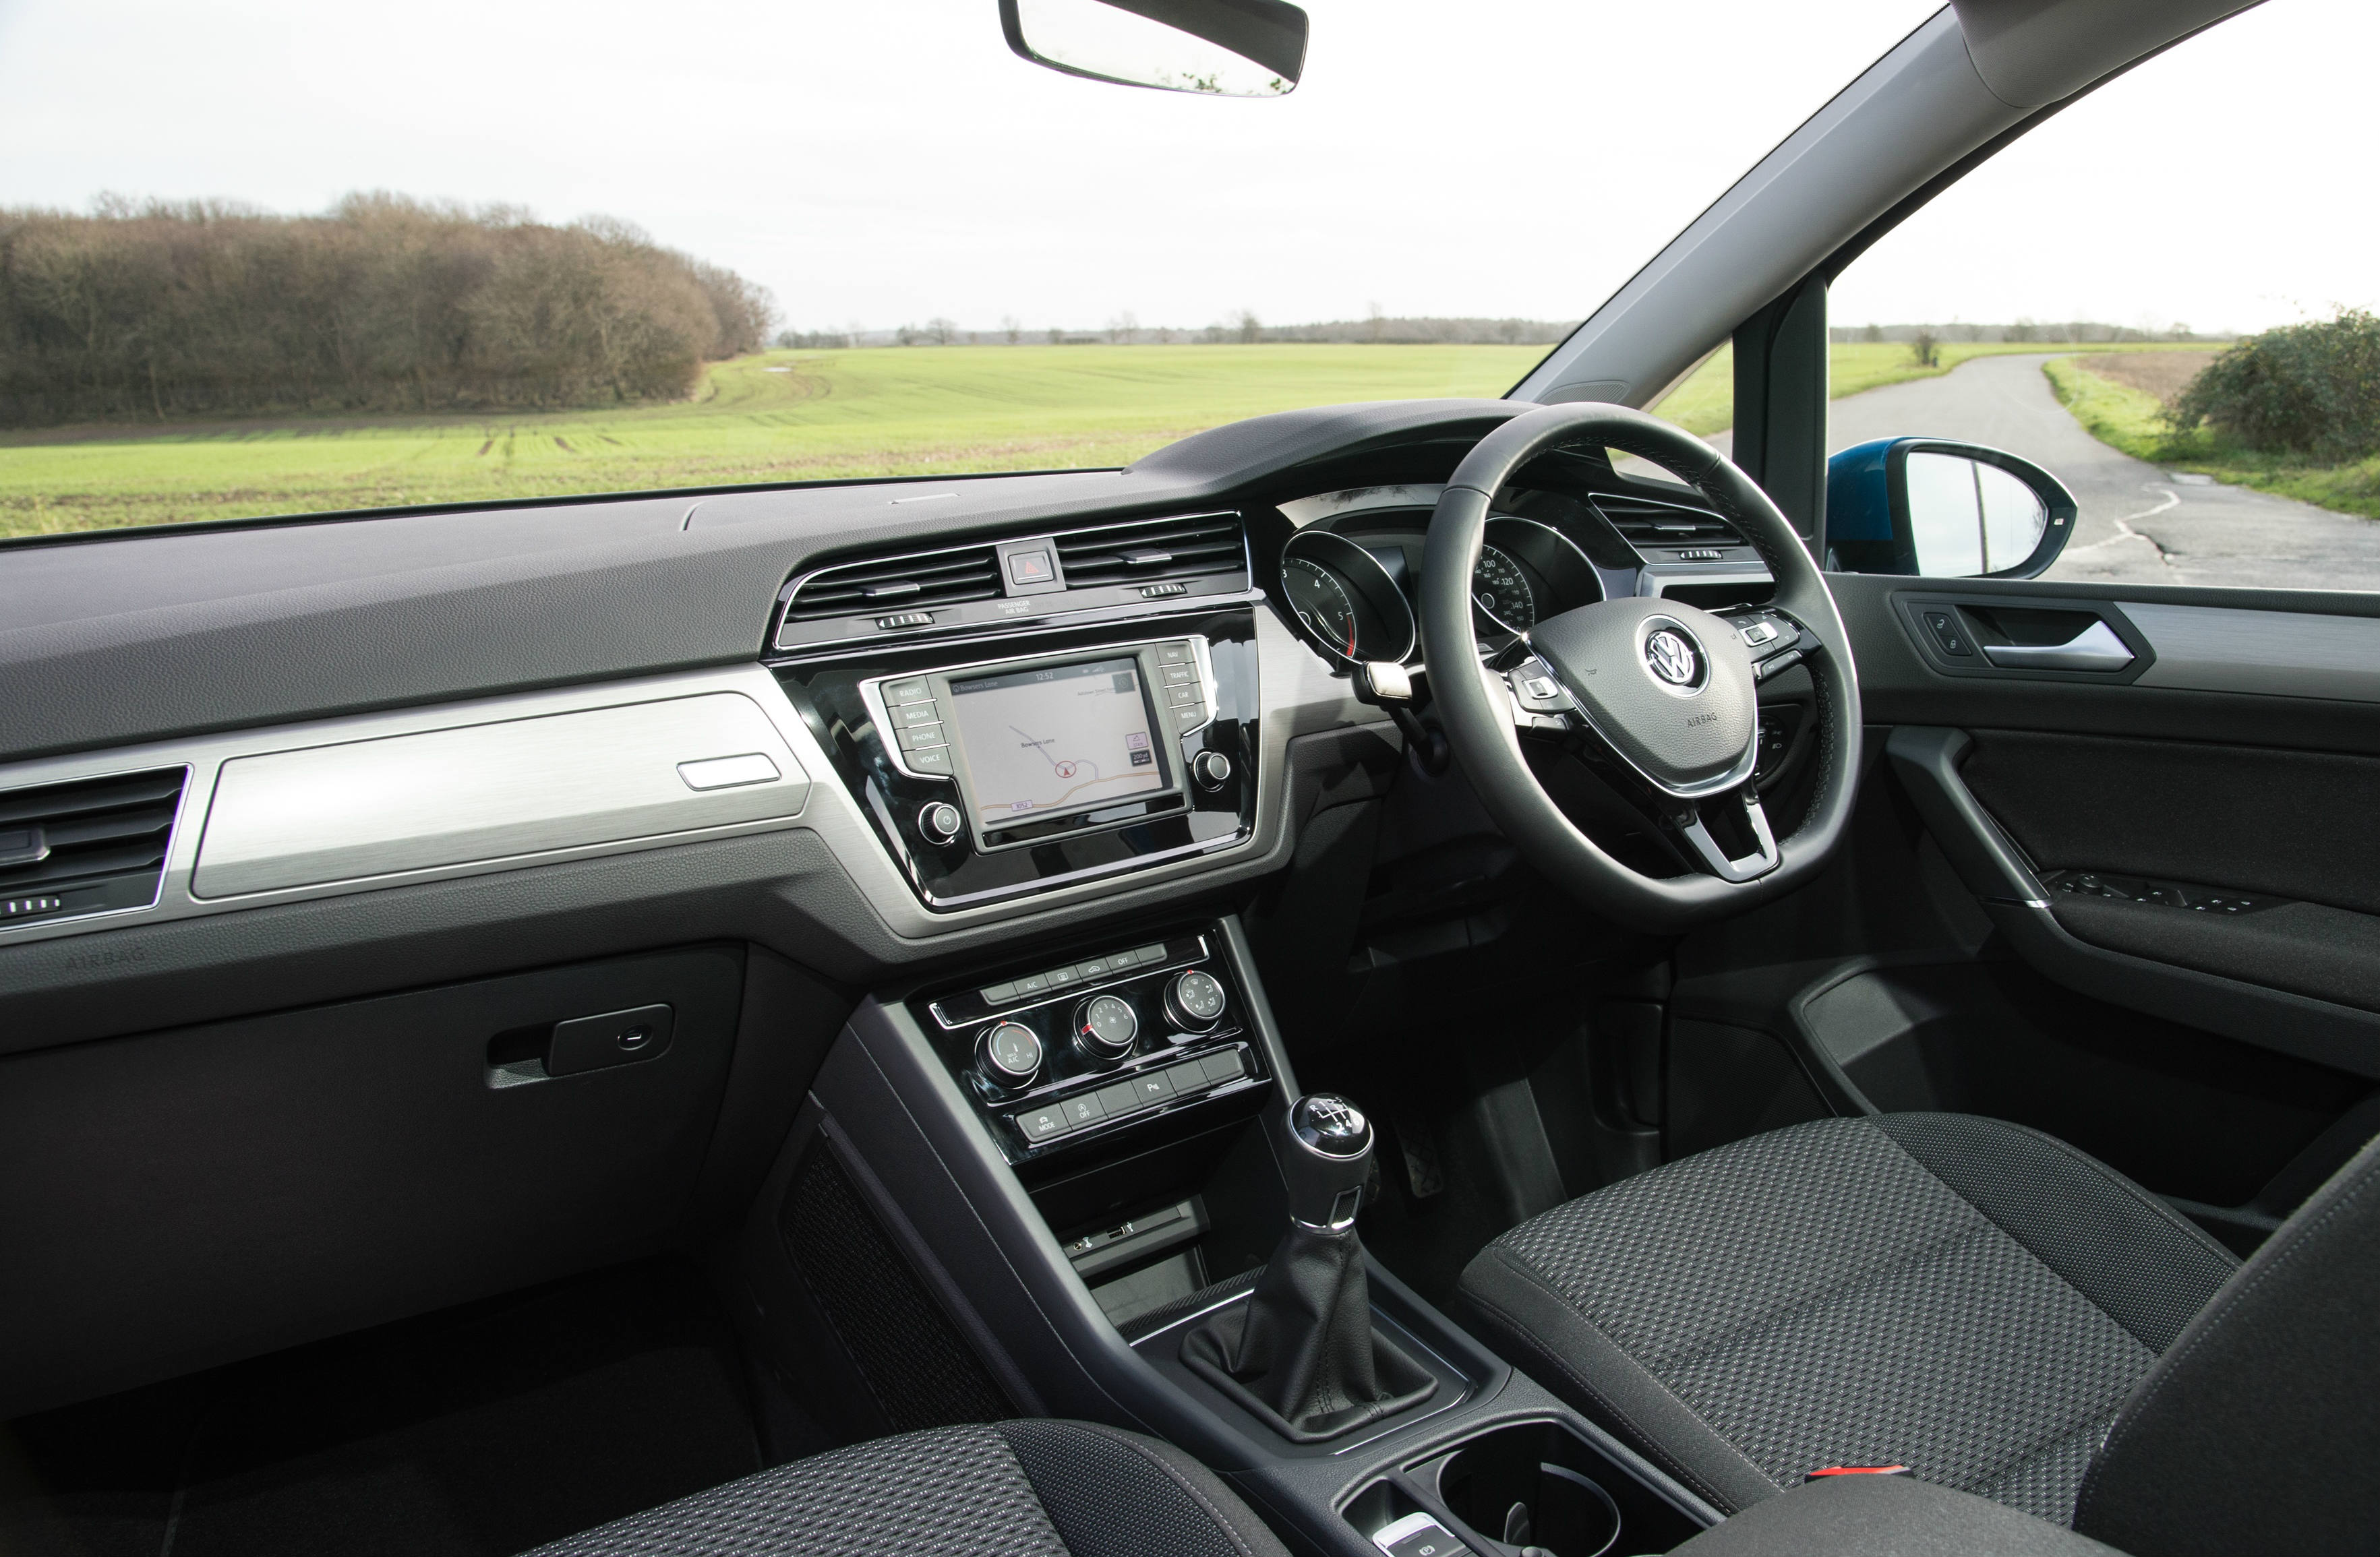 Review of the 2016 VW Touran